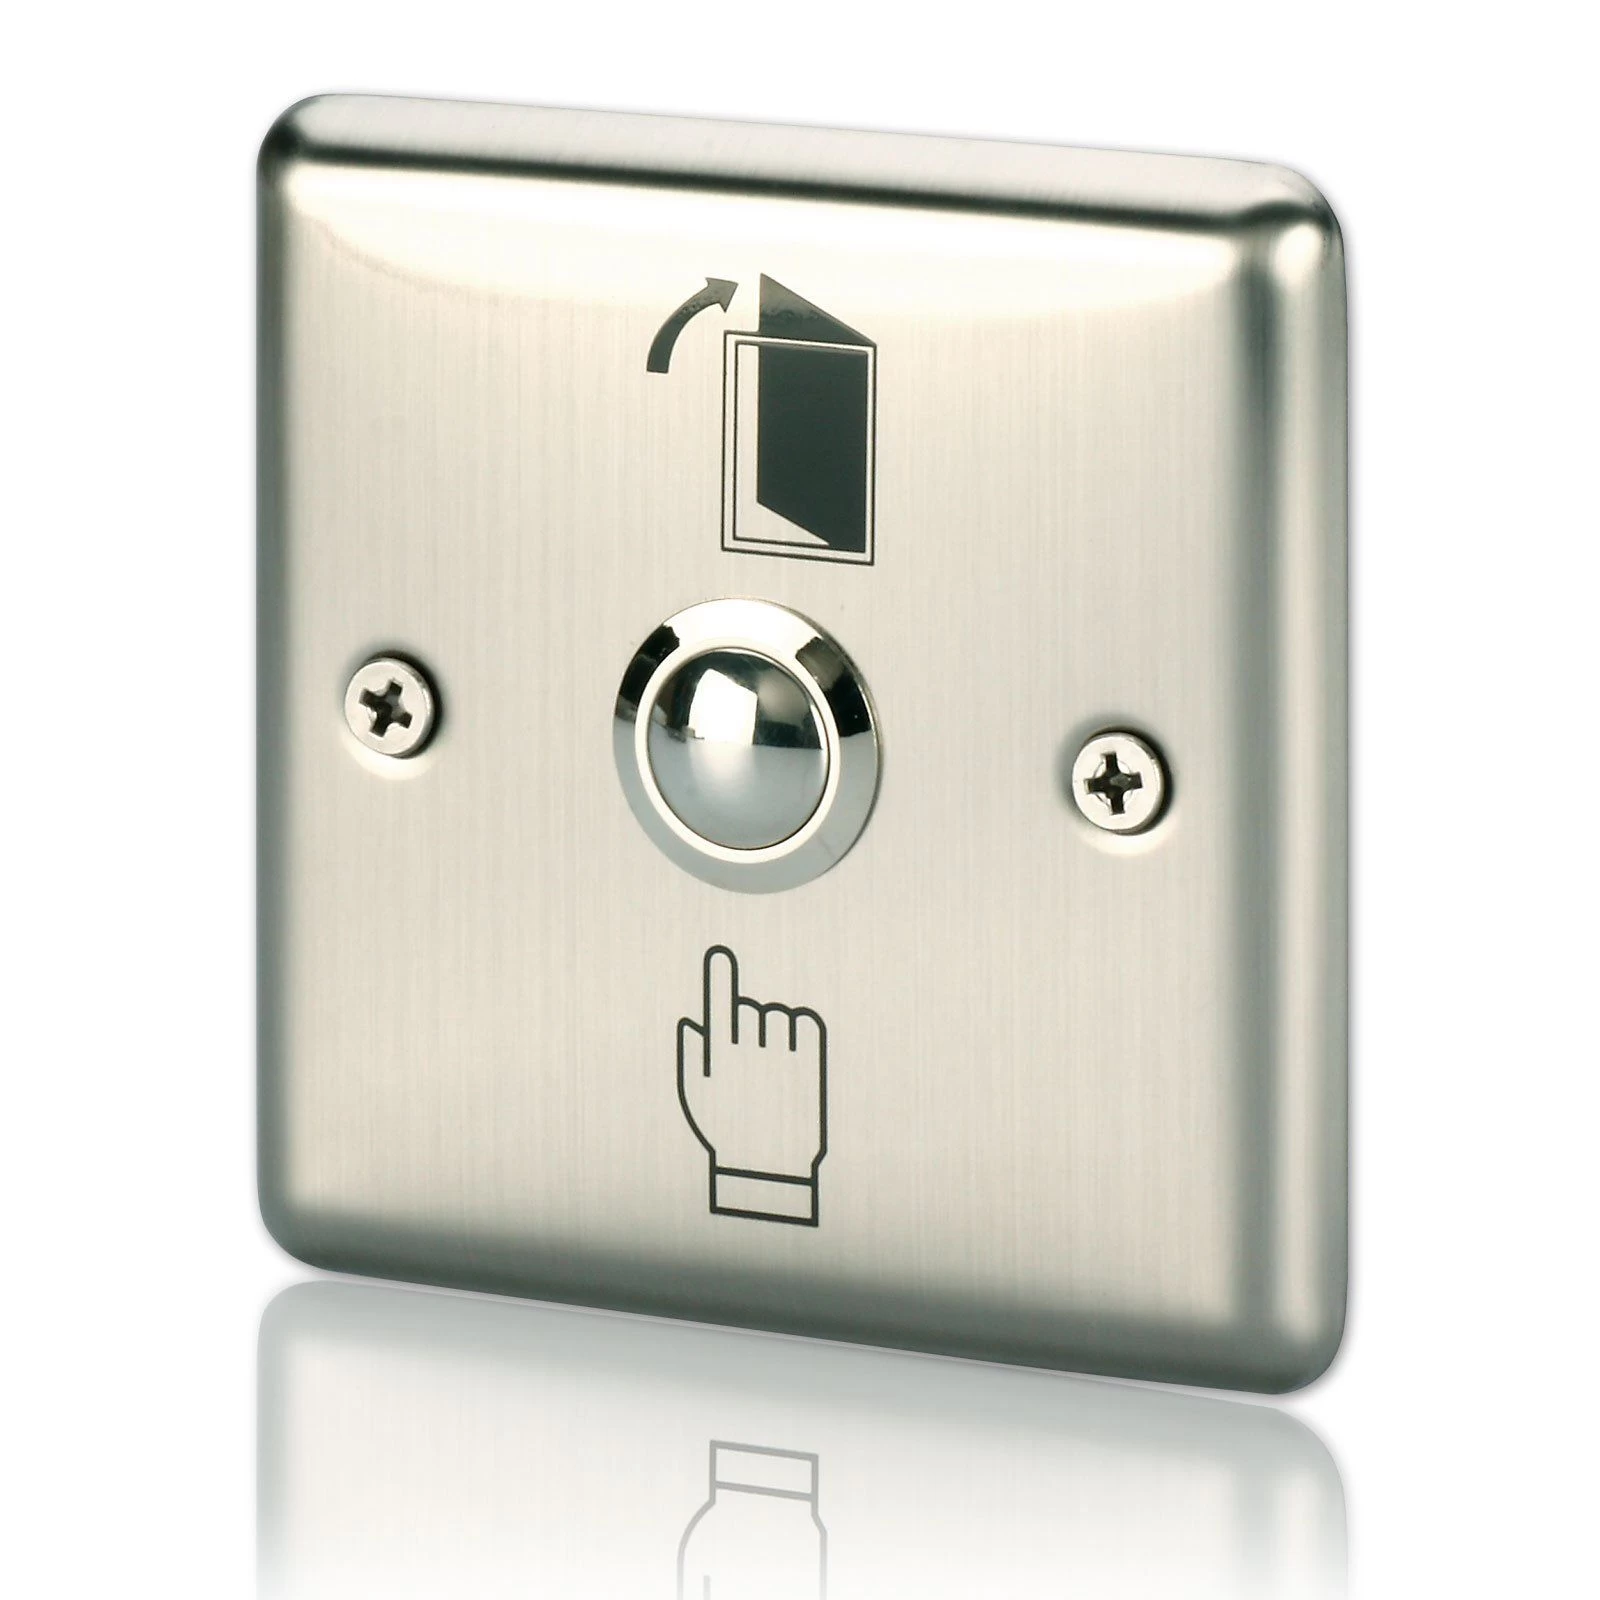 ACM-K5B Door Control Switch Stainless Steel Slim Exit Push Button Control Open Release ACM-K5A B